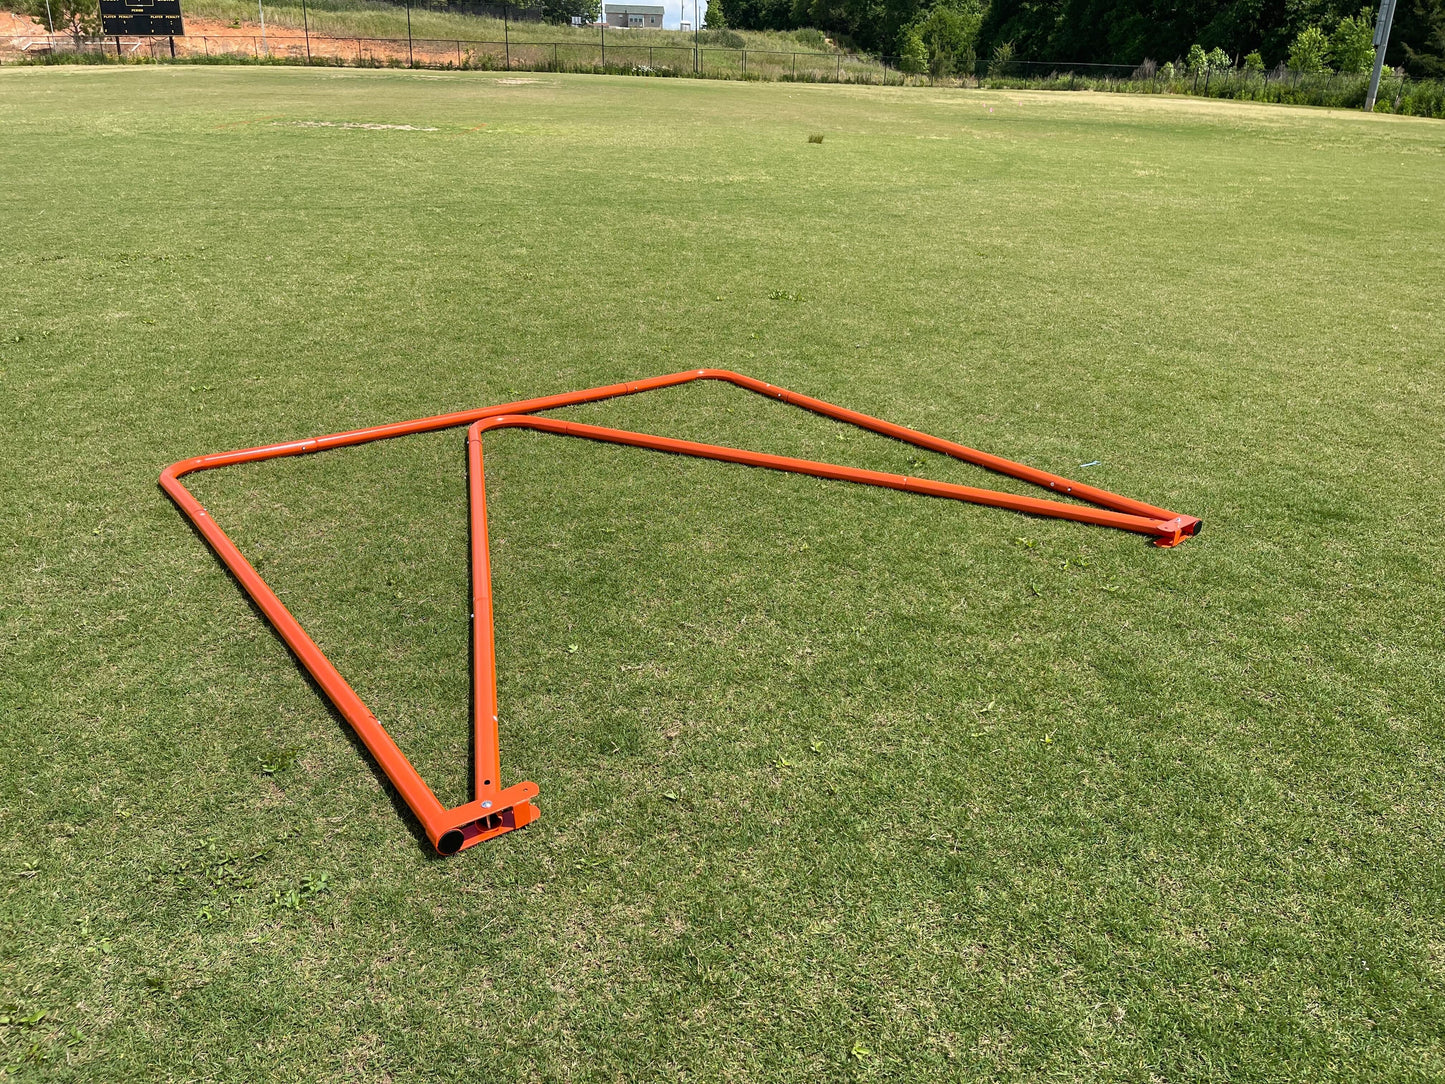 Folding Lacrosse Goal - Frame Only - 30 lbs, 6'x6'x7' by Crankshooter® - Free Shipping